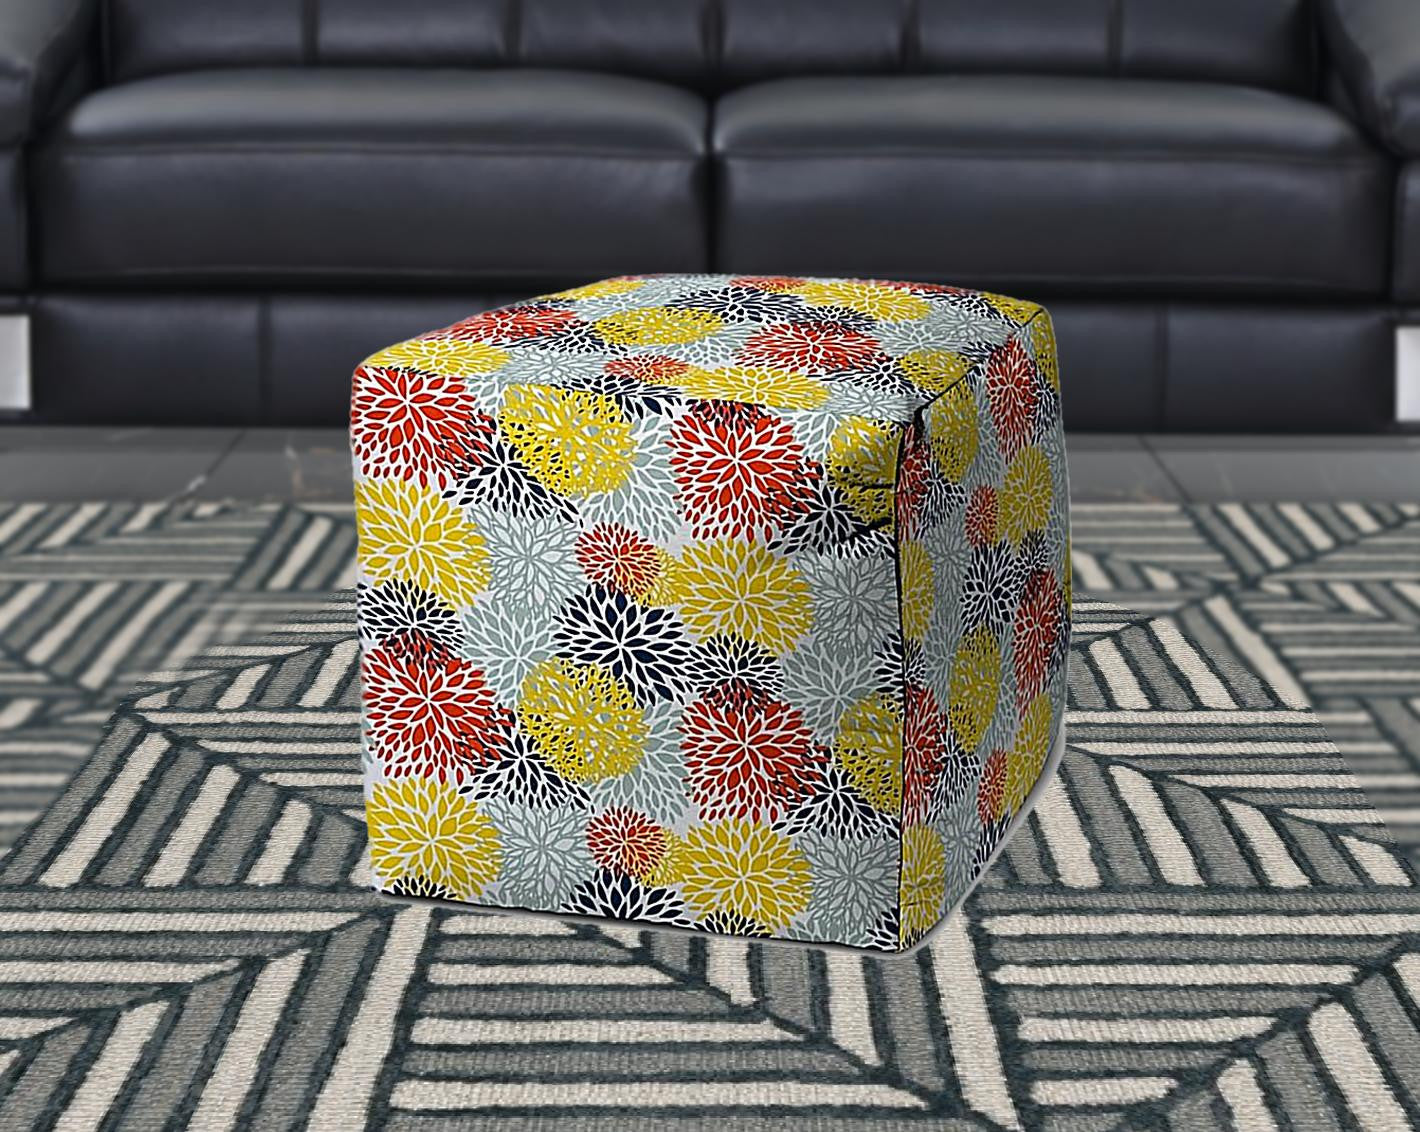 17" Blue Polyester Cube Floral Indoor Outdoor Pouf Ottoman